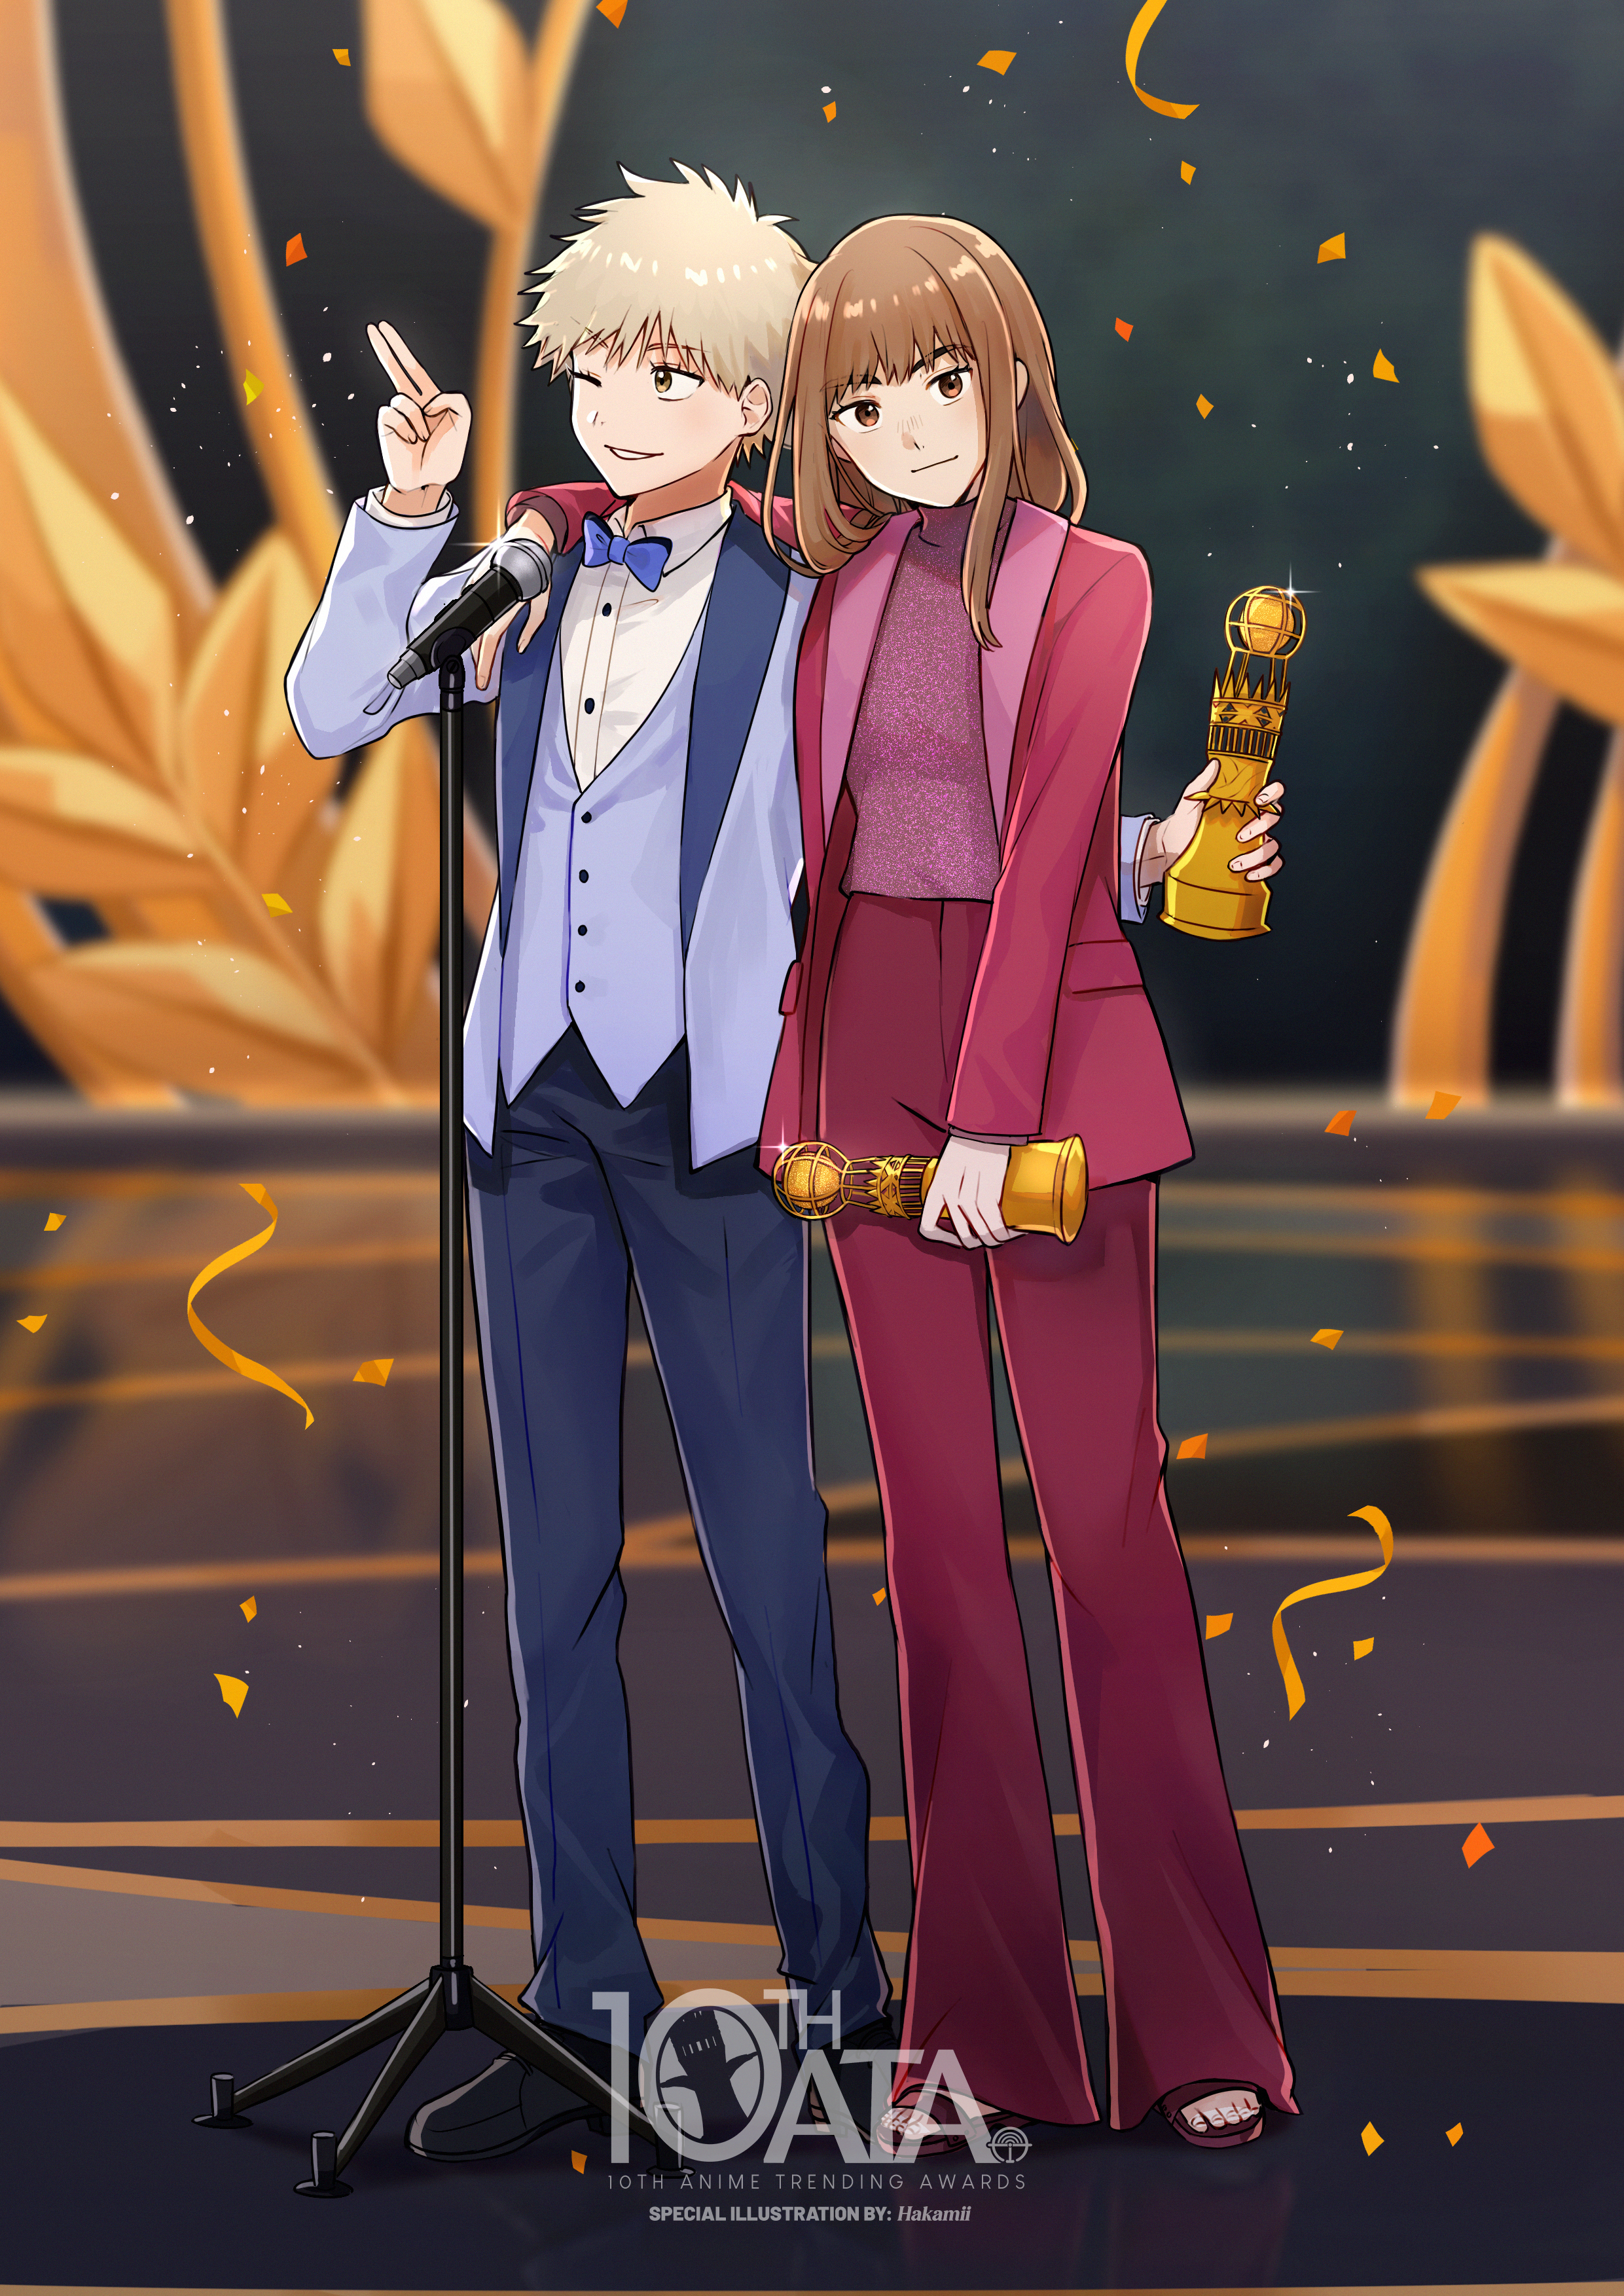 Tengoku-Daimakyo wins Anime of the Year 2023 + 4 more awards at the 10th Anime Trending Awards!